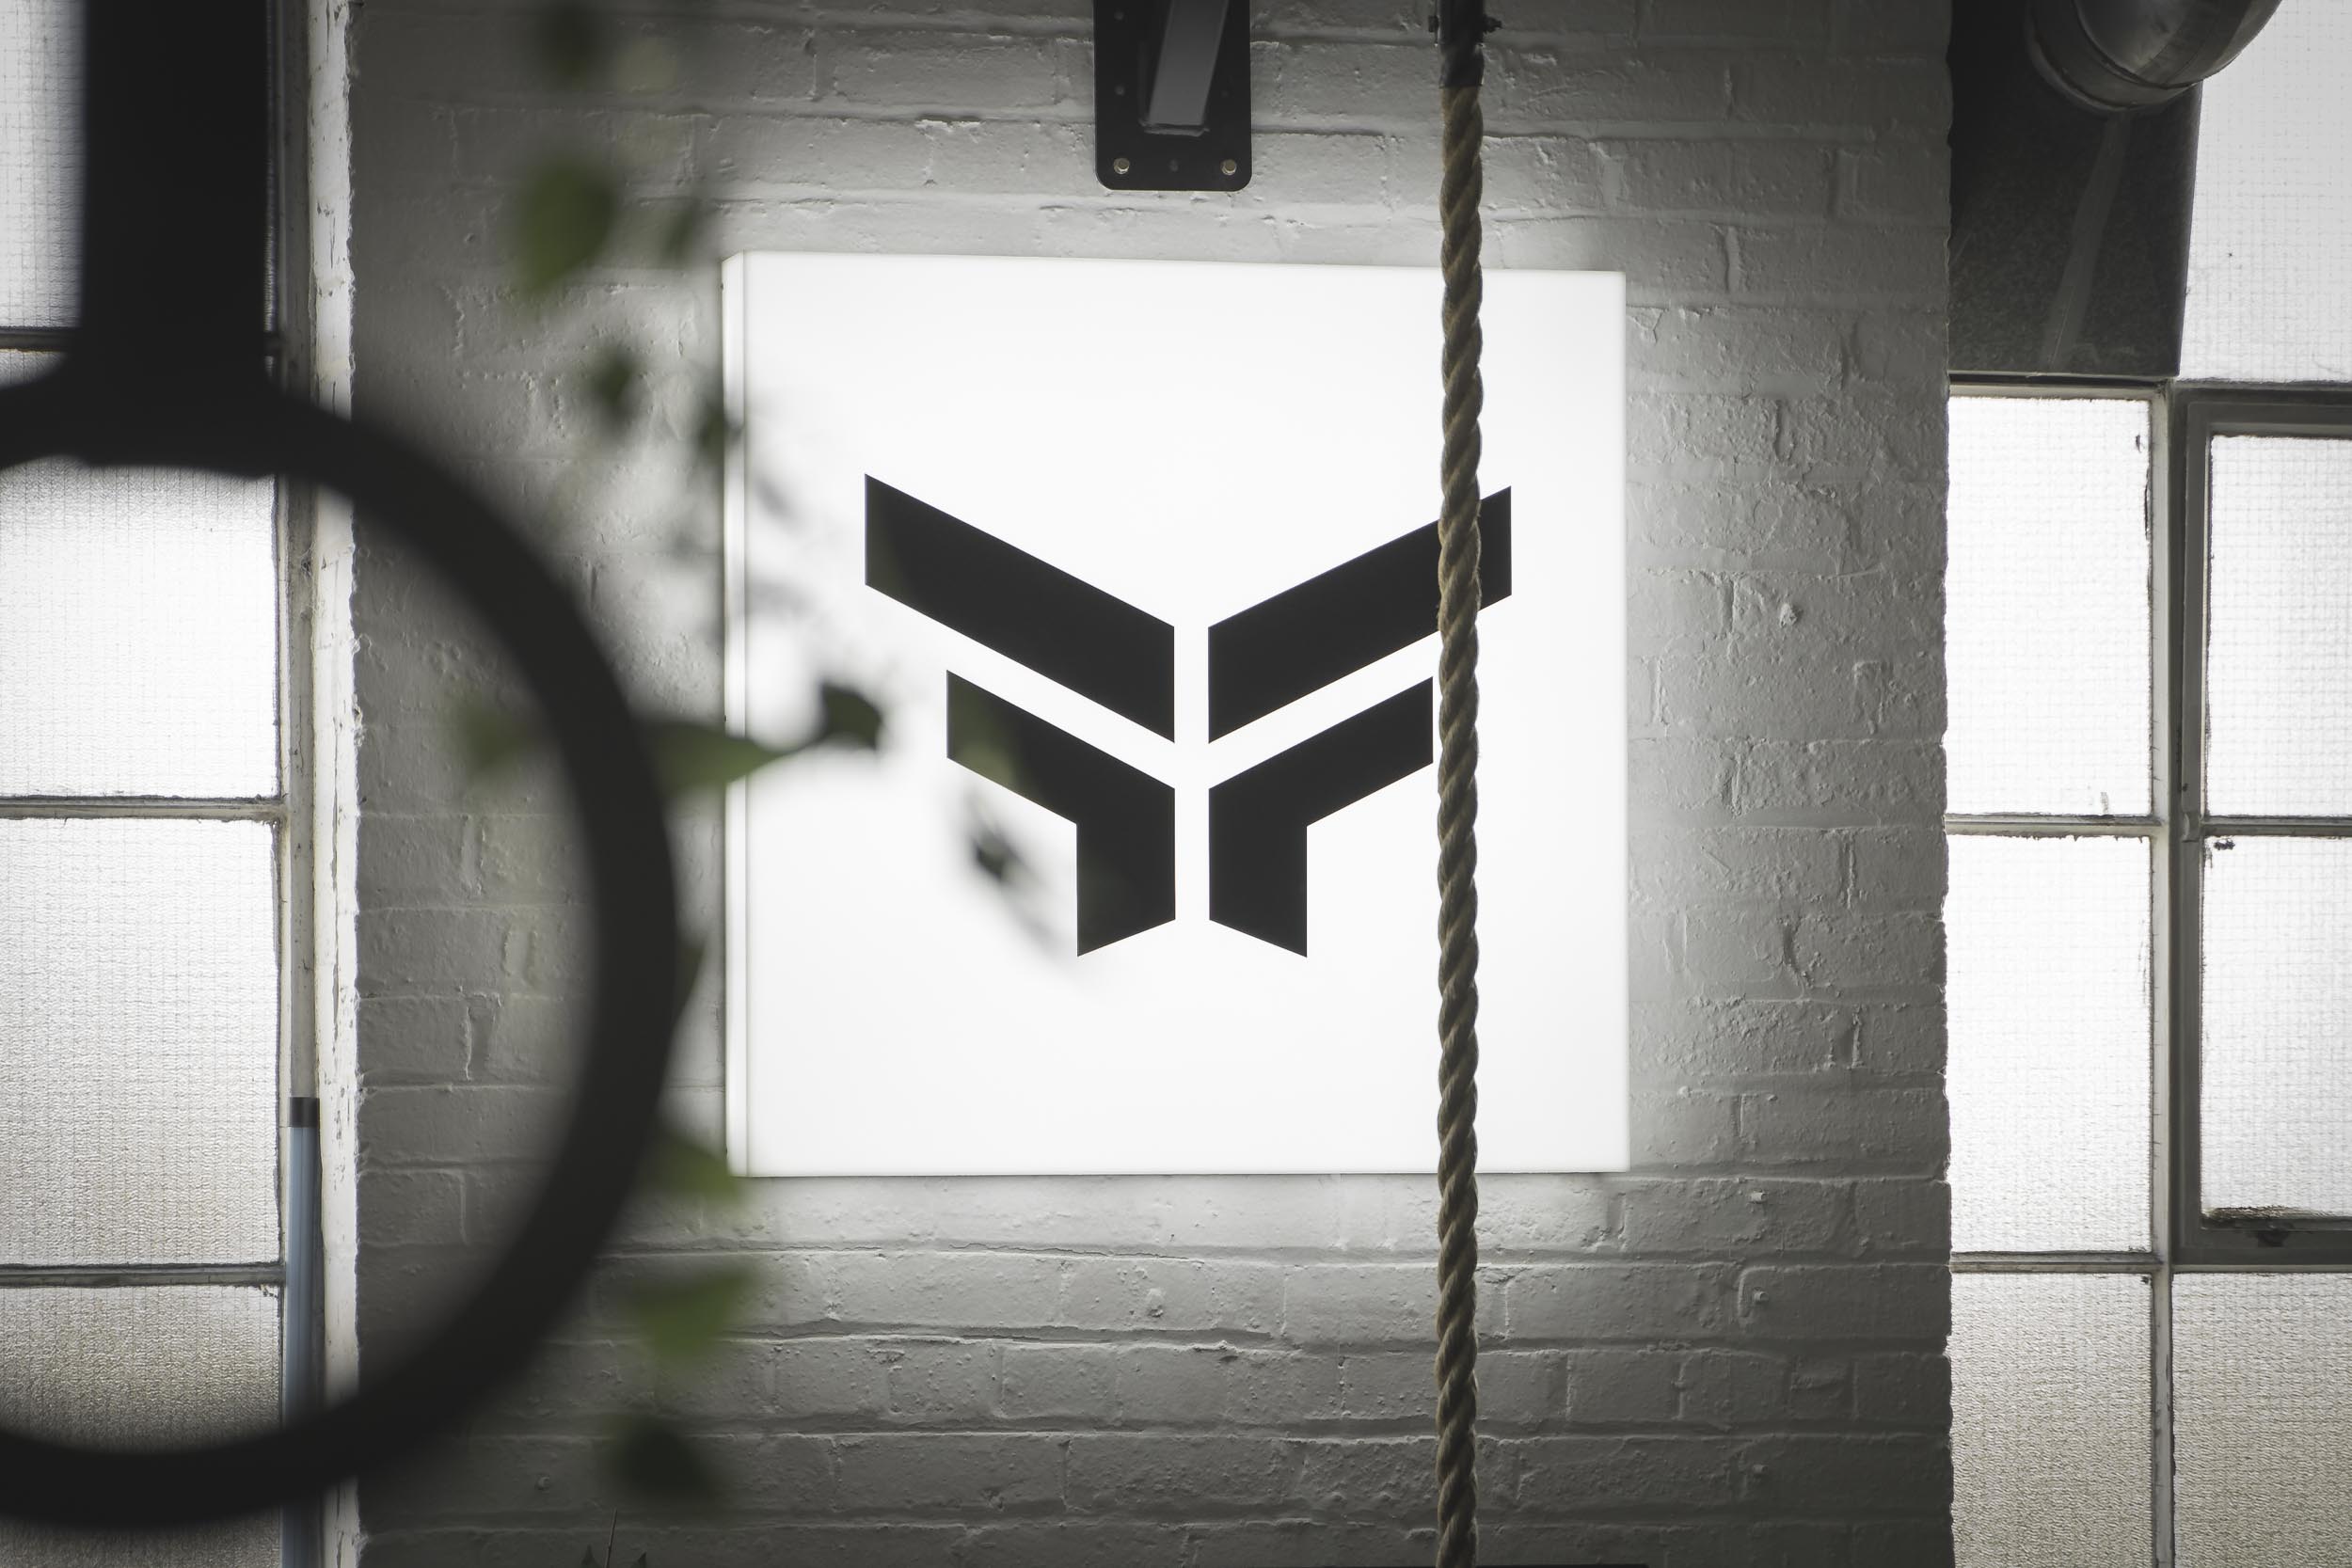 Stckmn Creates Brand Identity for Fitness and Apparel Studio Frontier Gear